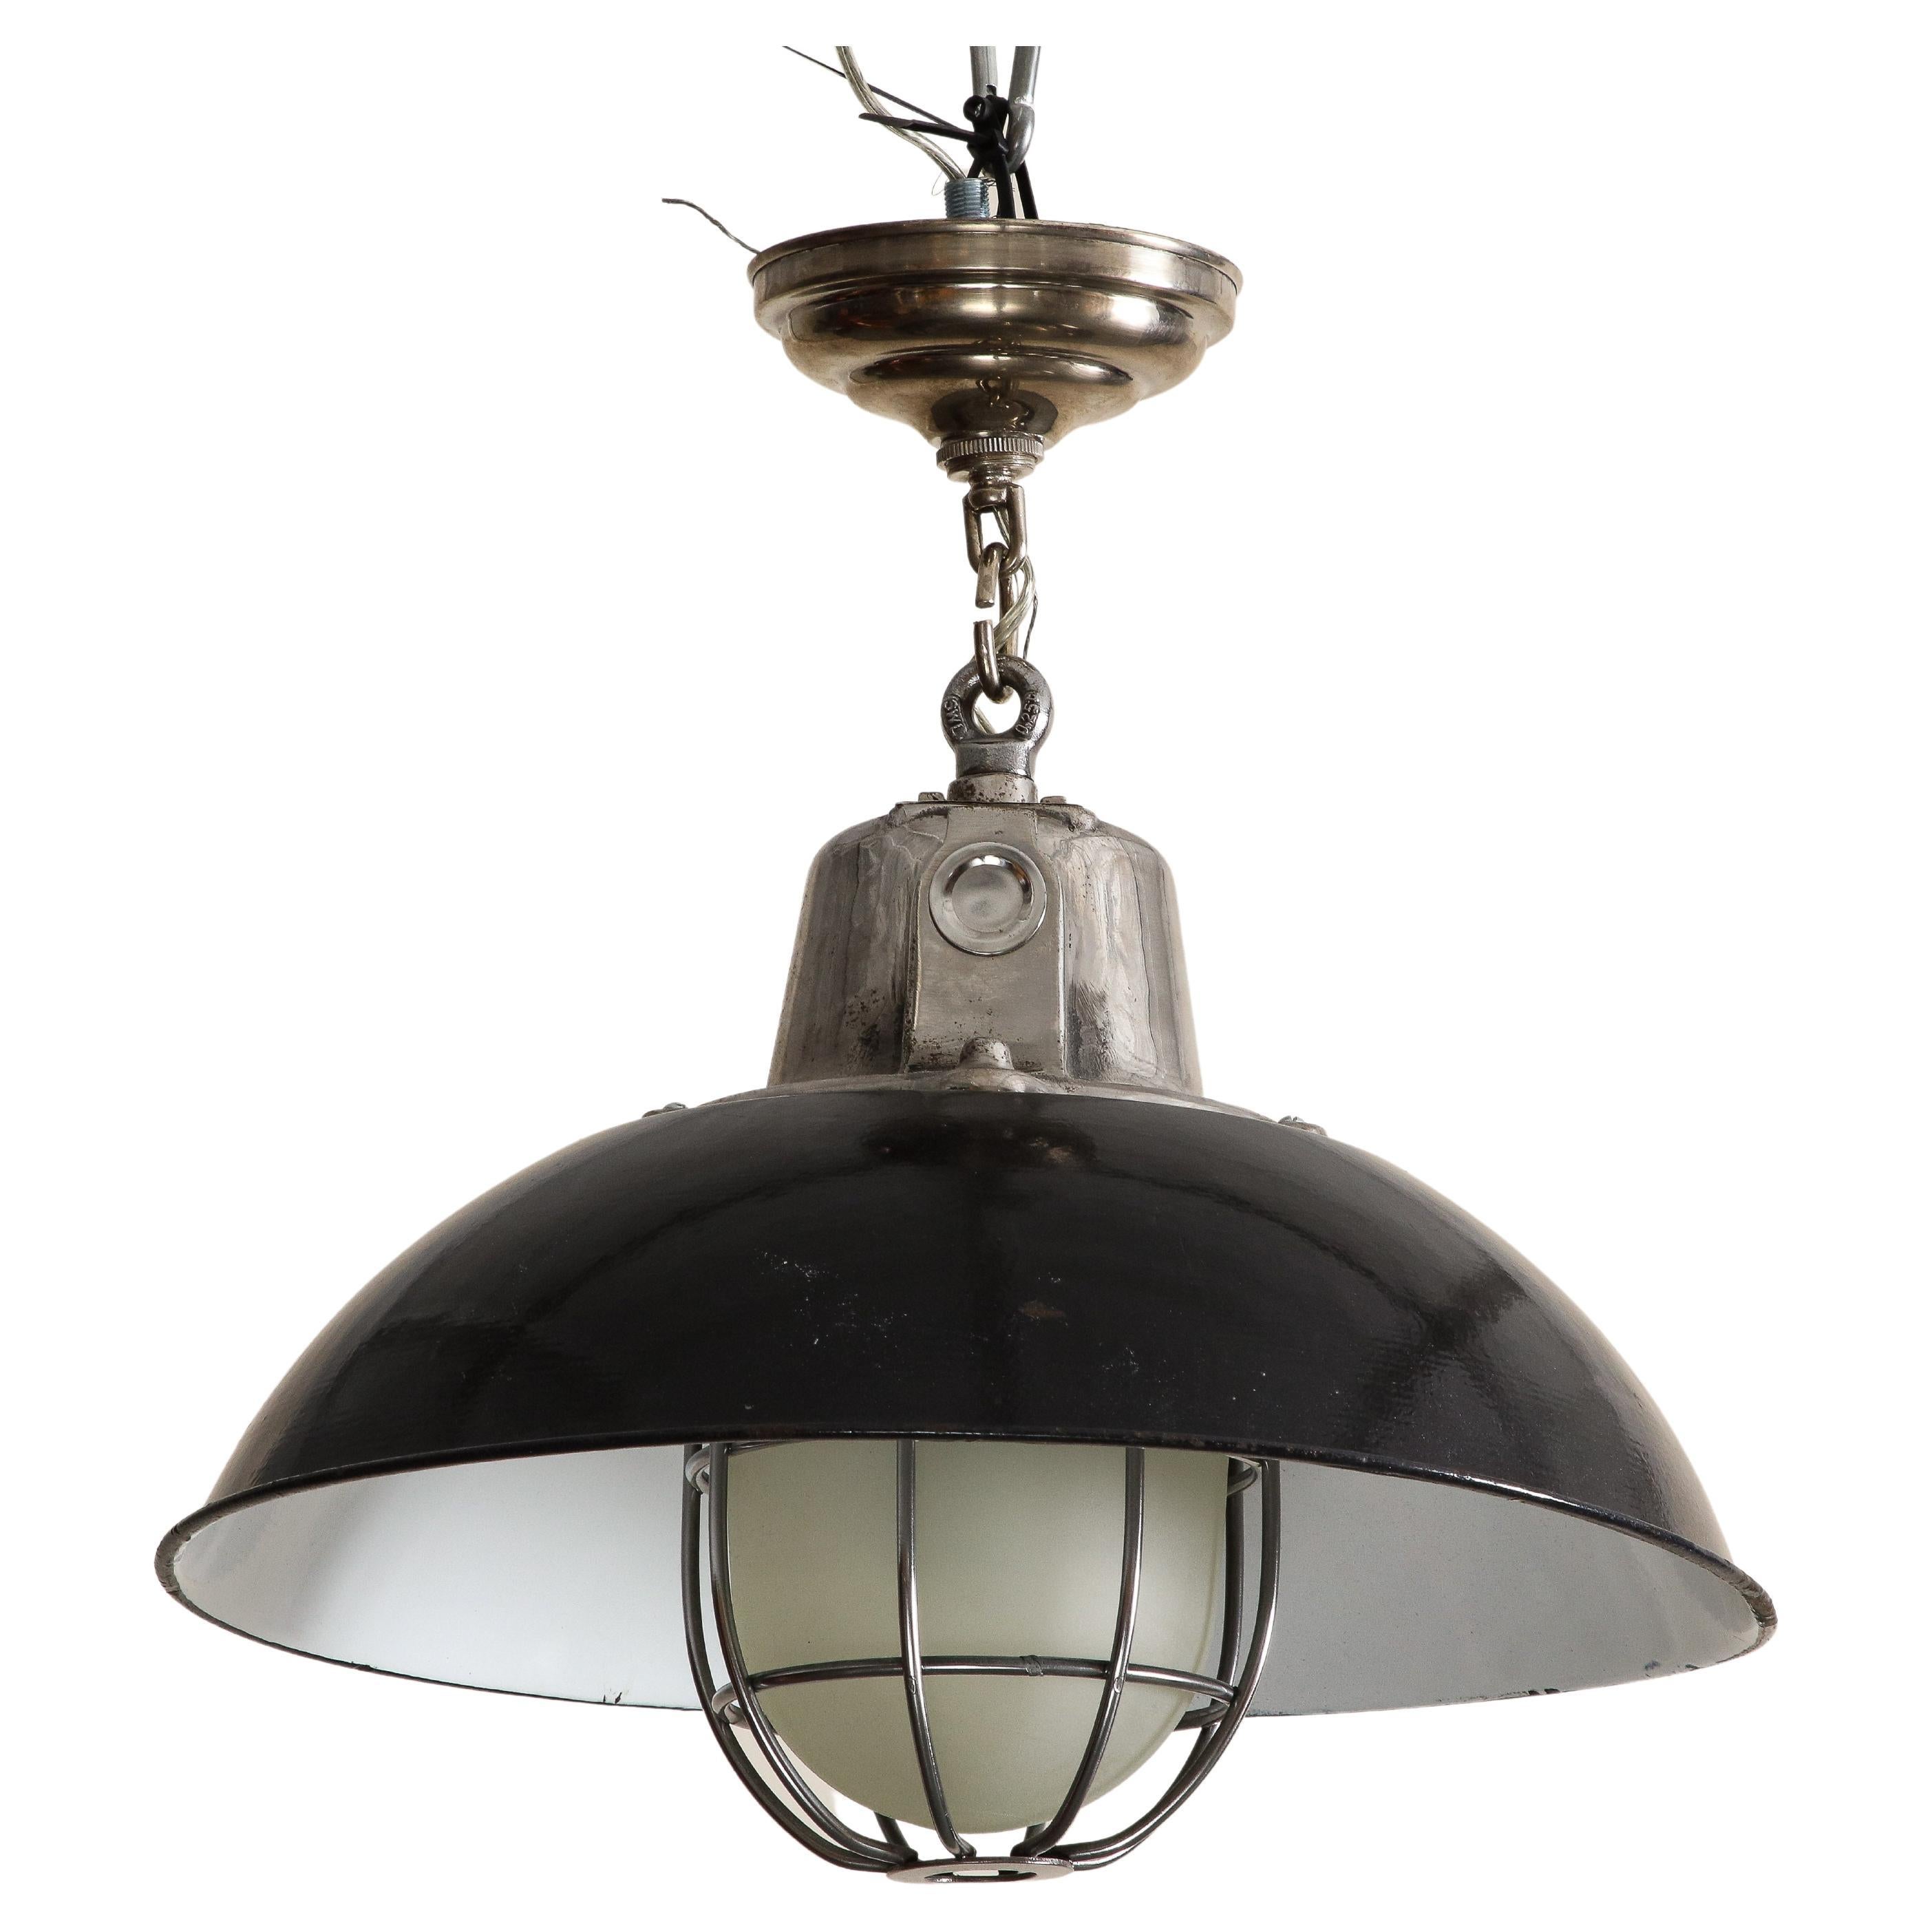 Pair of Midcentury Industrial Style Cage Pendant Lights with Black Enamel Shade For Sale